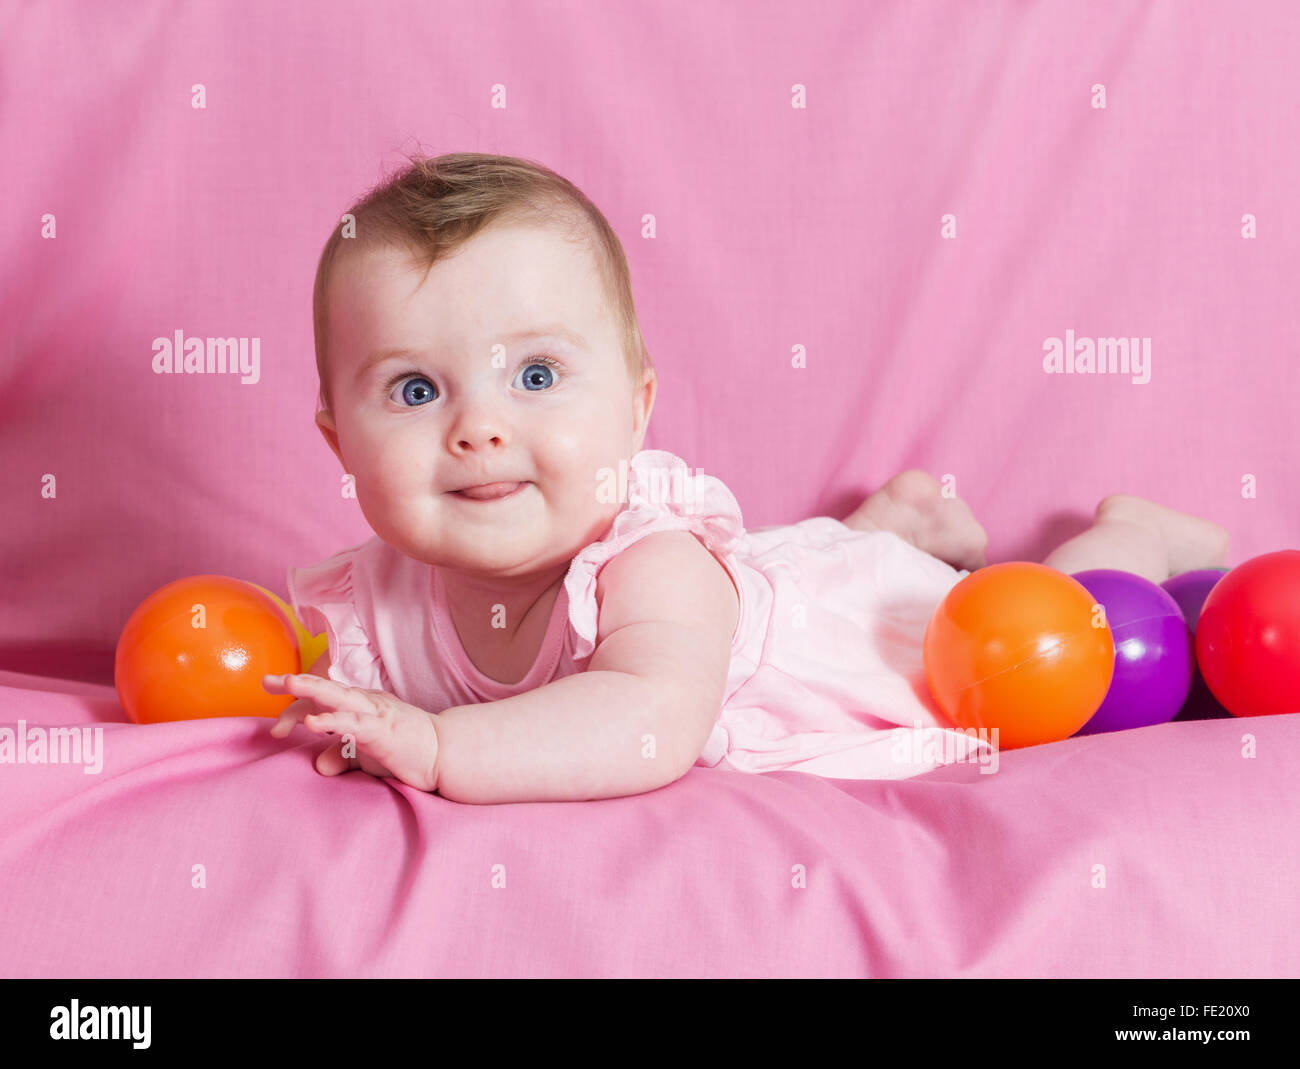 Adorable happy baby girl on pink background Stock Photo